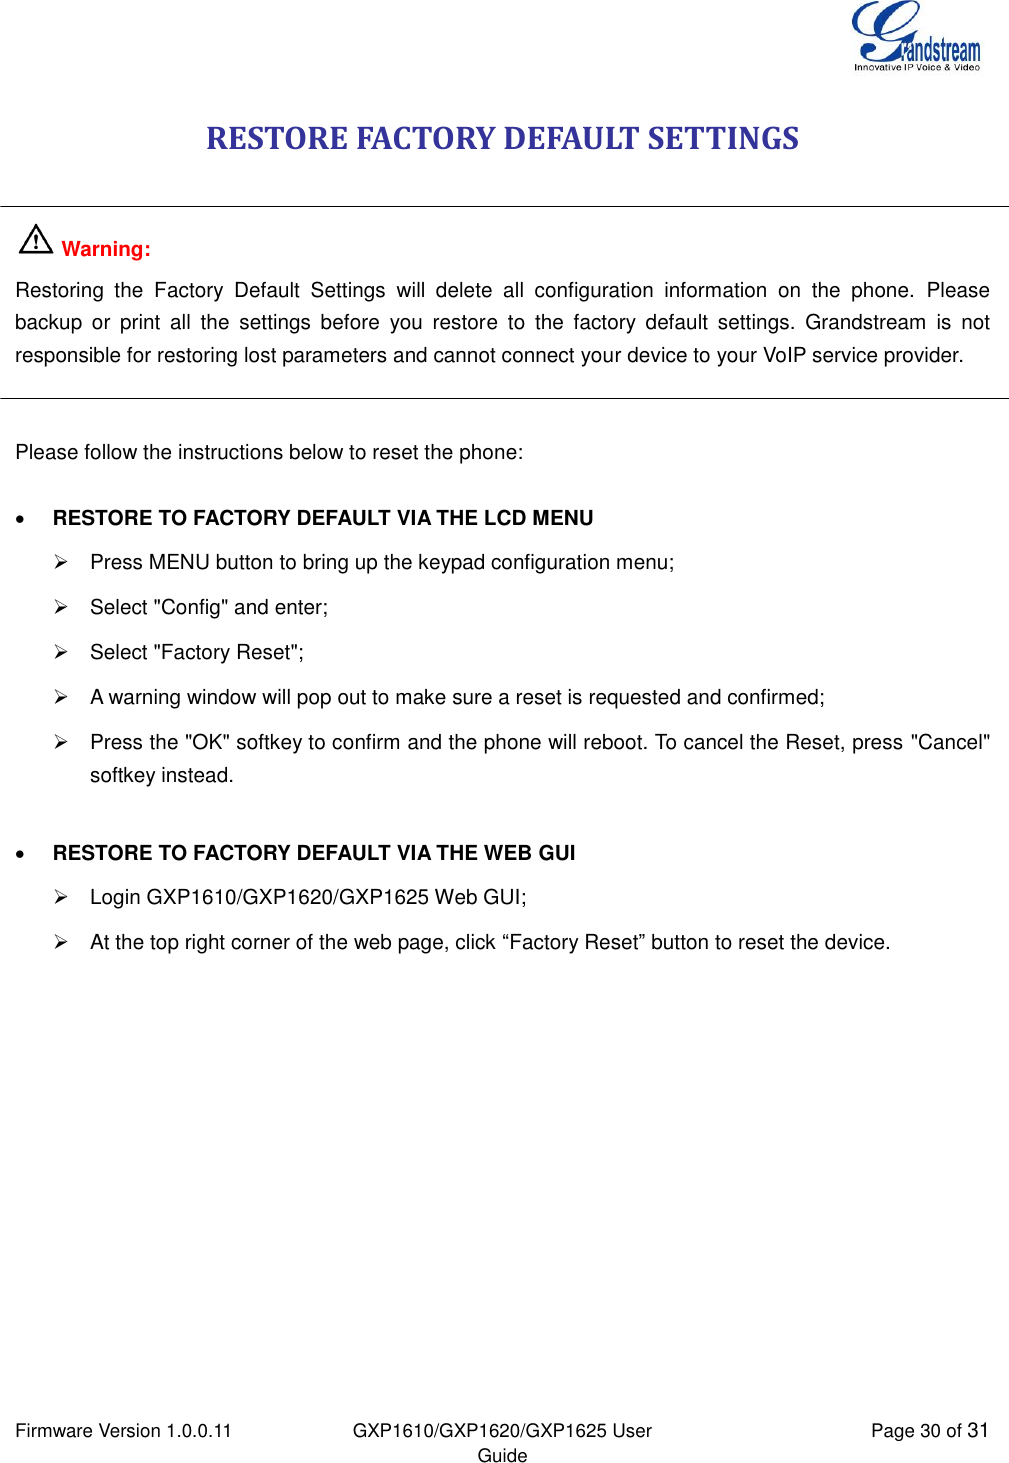  Firmware Version 1.0.0.11 GXP1610/GXP1620/GXP1625 User Guide Page 30 of 31  RESTORE FACTORY DEFAULT SETTINGS   Warning:  Restoring  the  Factory  Default  Settings  will  delete  all  configuration  information  on  the  phone.  Please backup  or  print  all  the  settings  before  you  restore  to  the  factory  default  settings.  Grandstream  is  not responsible for restoring lost parameters and cannot connect your device to your VoIP service provider.   Please follow the instructions below to reset the phone:   RESTORE TO FACTORY DEFAULT VIA THE LCD MENU   Press MENU button to bring up the keypad configuration menu;   Select &quot;Config&quot; and enter;   Select &quot;Factory Reset&quot;;   A warning window will pop out to make sure a reset is requested and confirmed;   Press the &quot;OK&quot; softkey to confirm and the phone will reboot. To cancel the Reset, press &quot;Cancel&quot; softkey instead.   RESTORE TO FACTORY DEFAULT VIA THE WEB GUI   Login GXP1610/GXP1620/GXP1625 Web GUI;   At the top right corner of the web page, click “Factory Reset” button to reset the device.